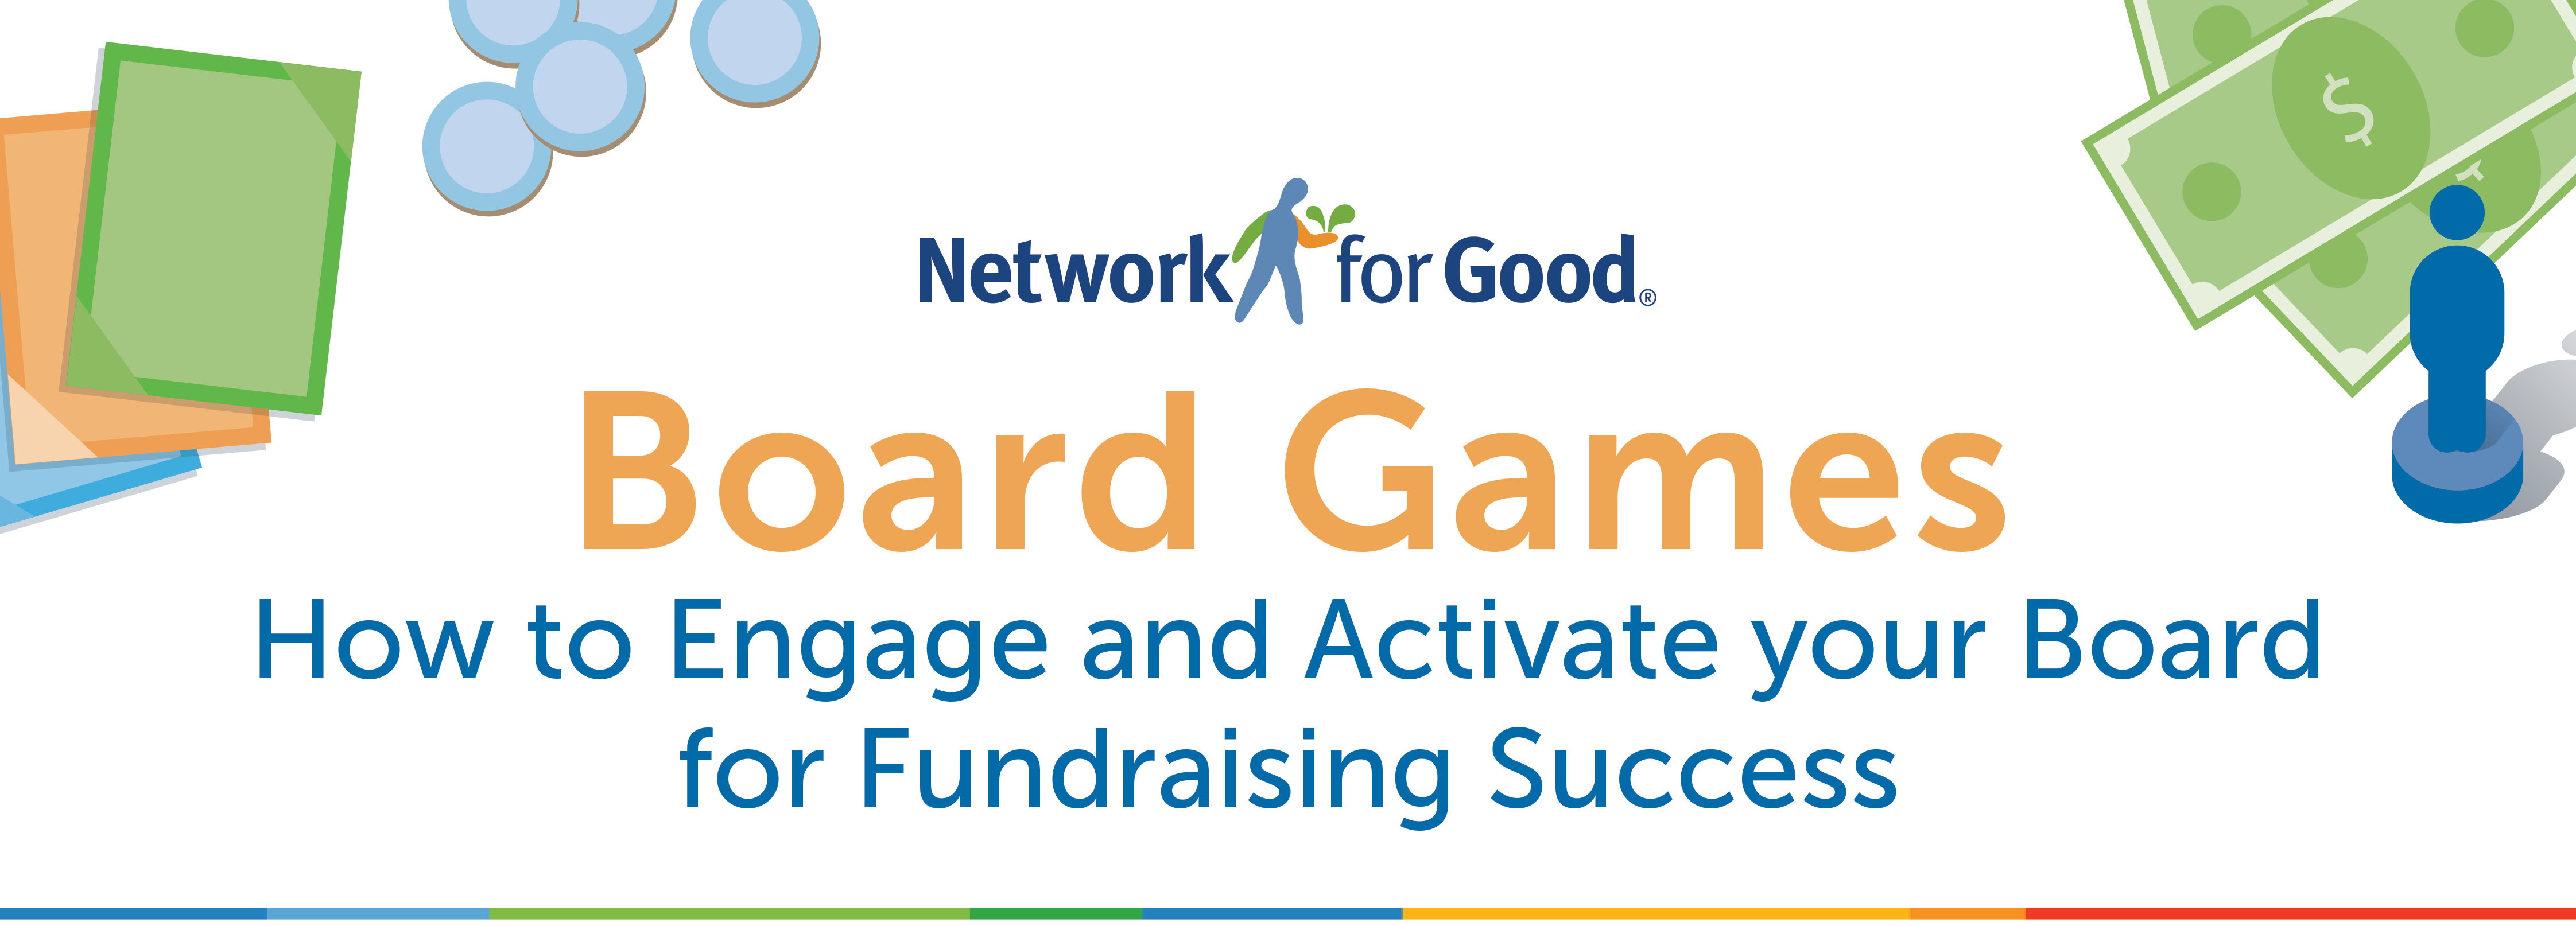 How to Engage Your Board for Fundraising Success